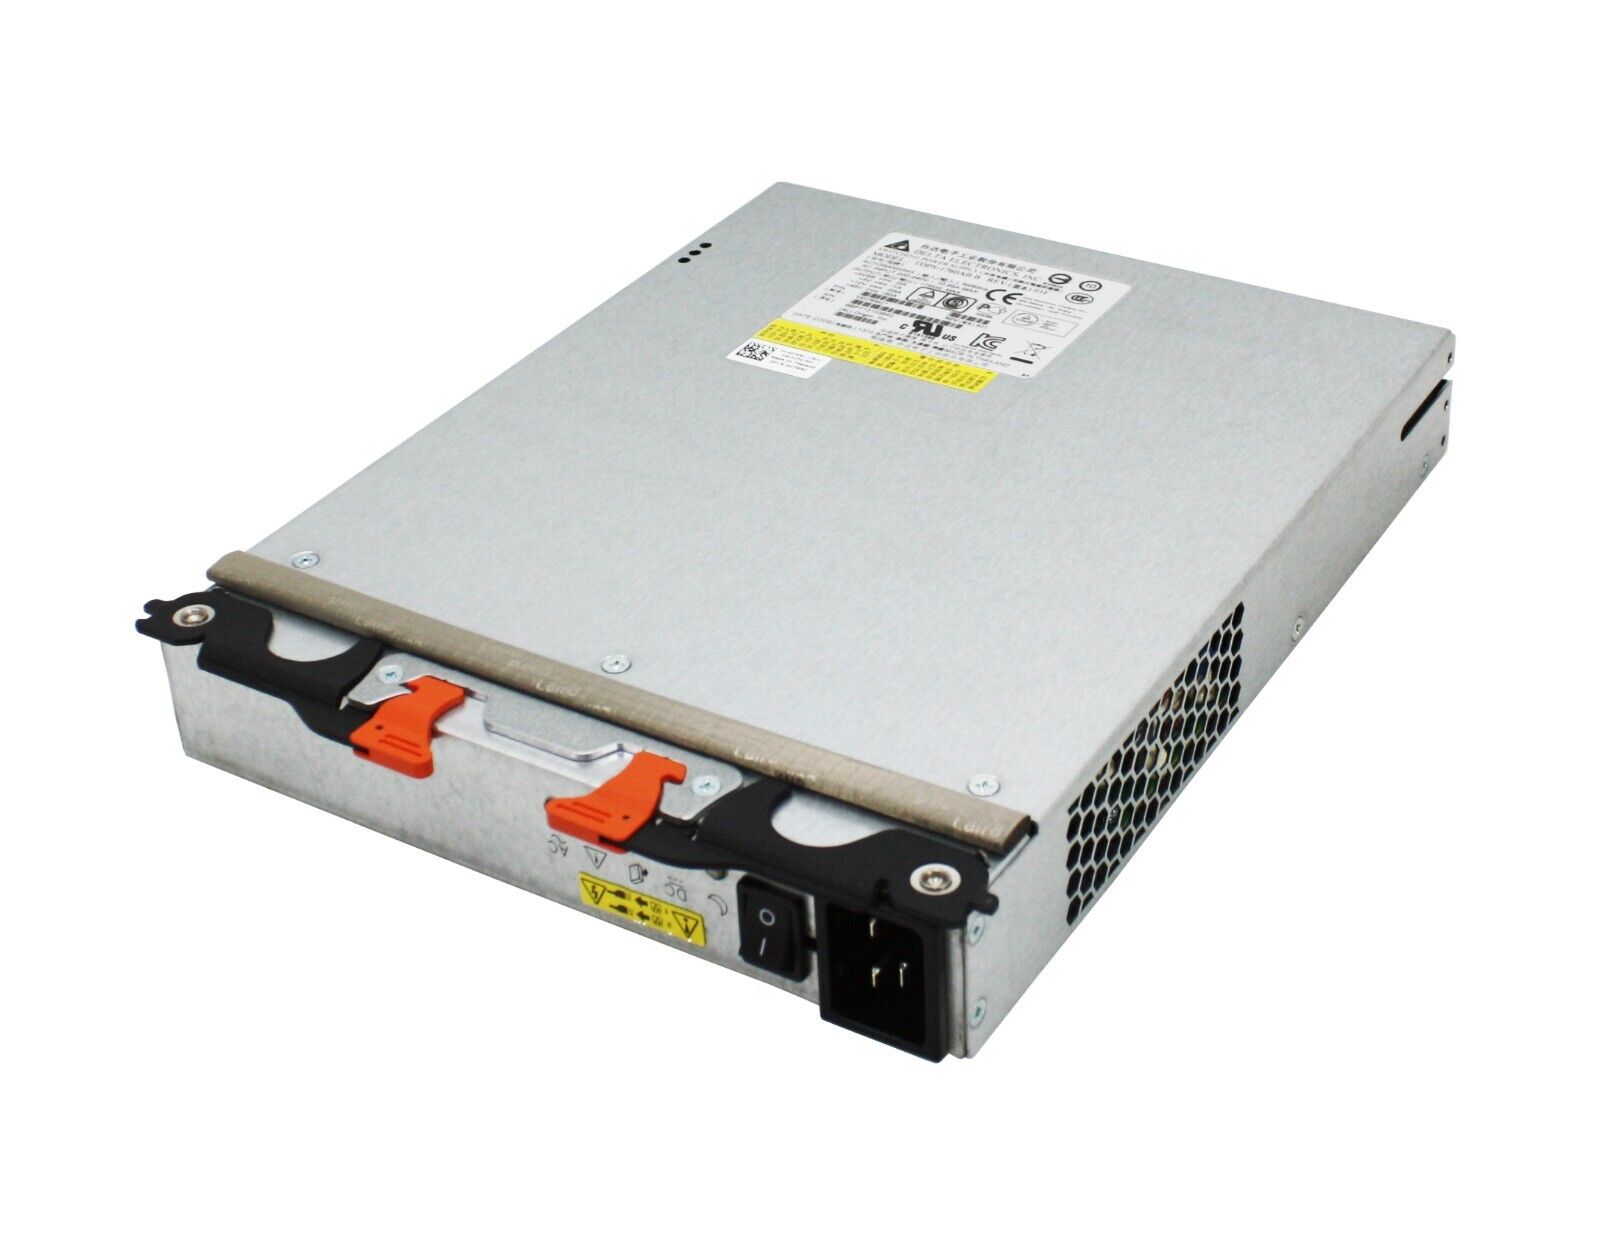 D7RNC Dell PowerVault MD3060E MD3260 MD3460 MD3660 MD3860 1755W Power Supply